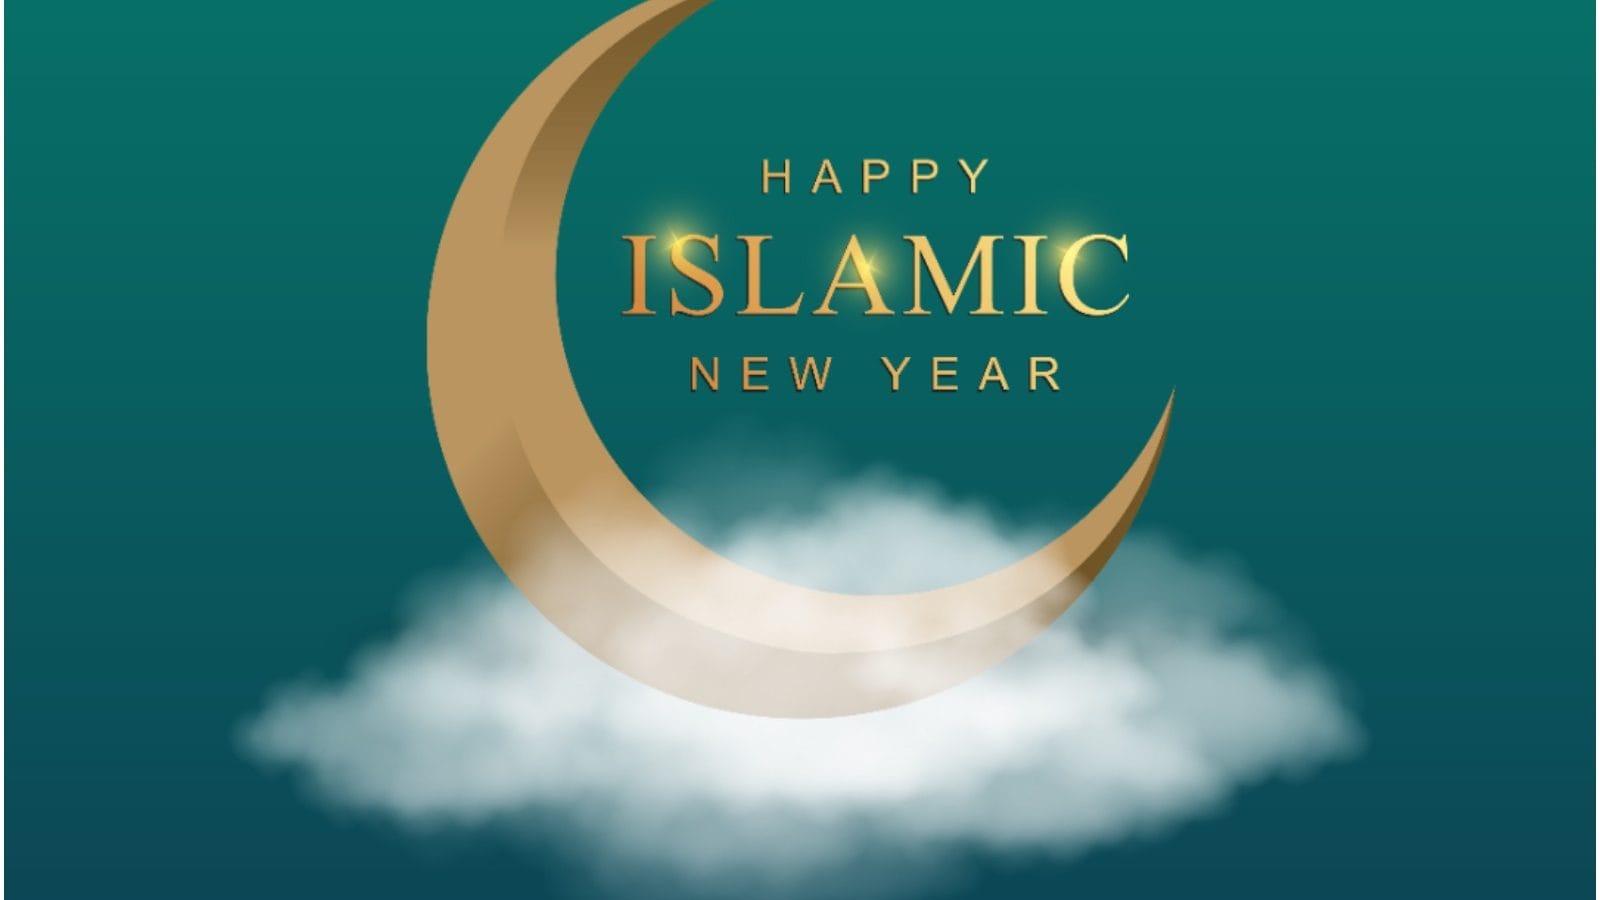 Happy Islamic New Year 2021 Images, Wishes, Quotes, Messages and